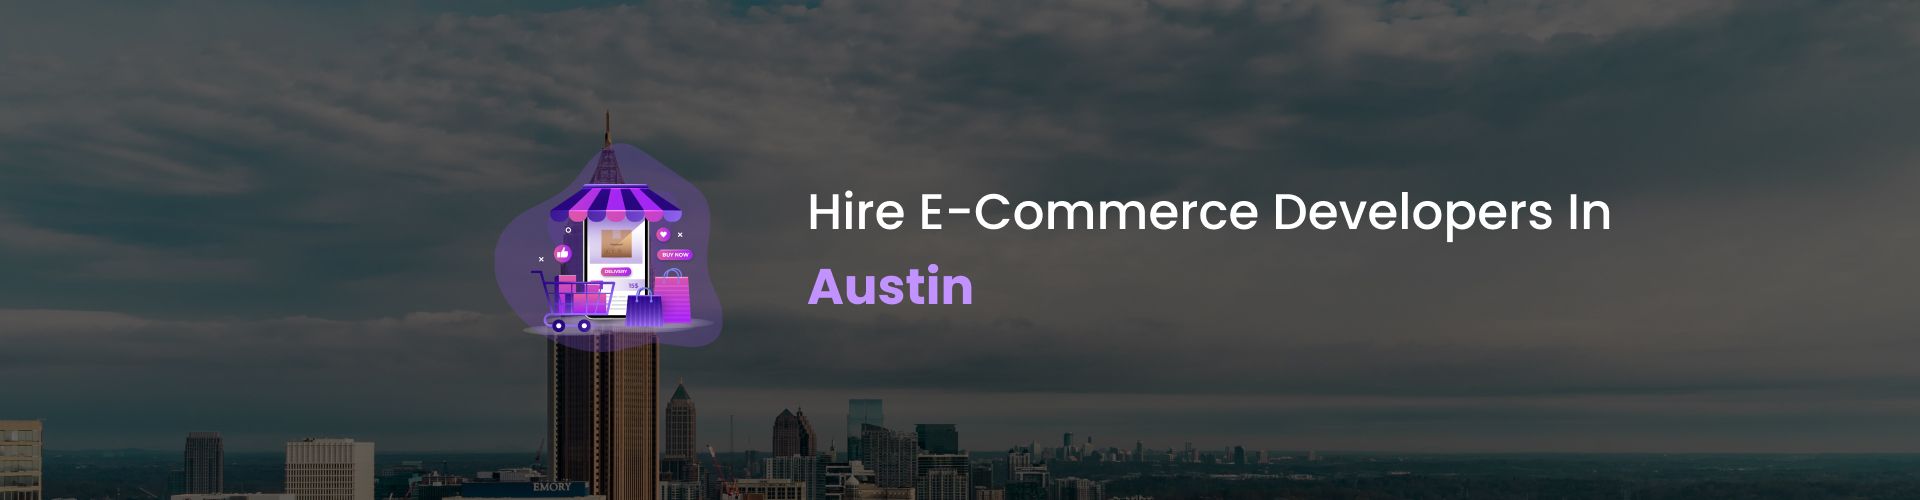 hire ecommerce developers in austin